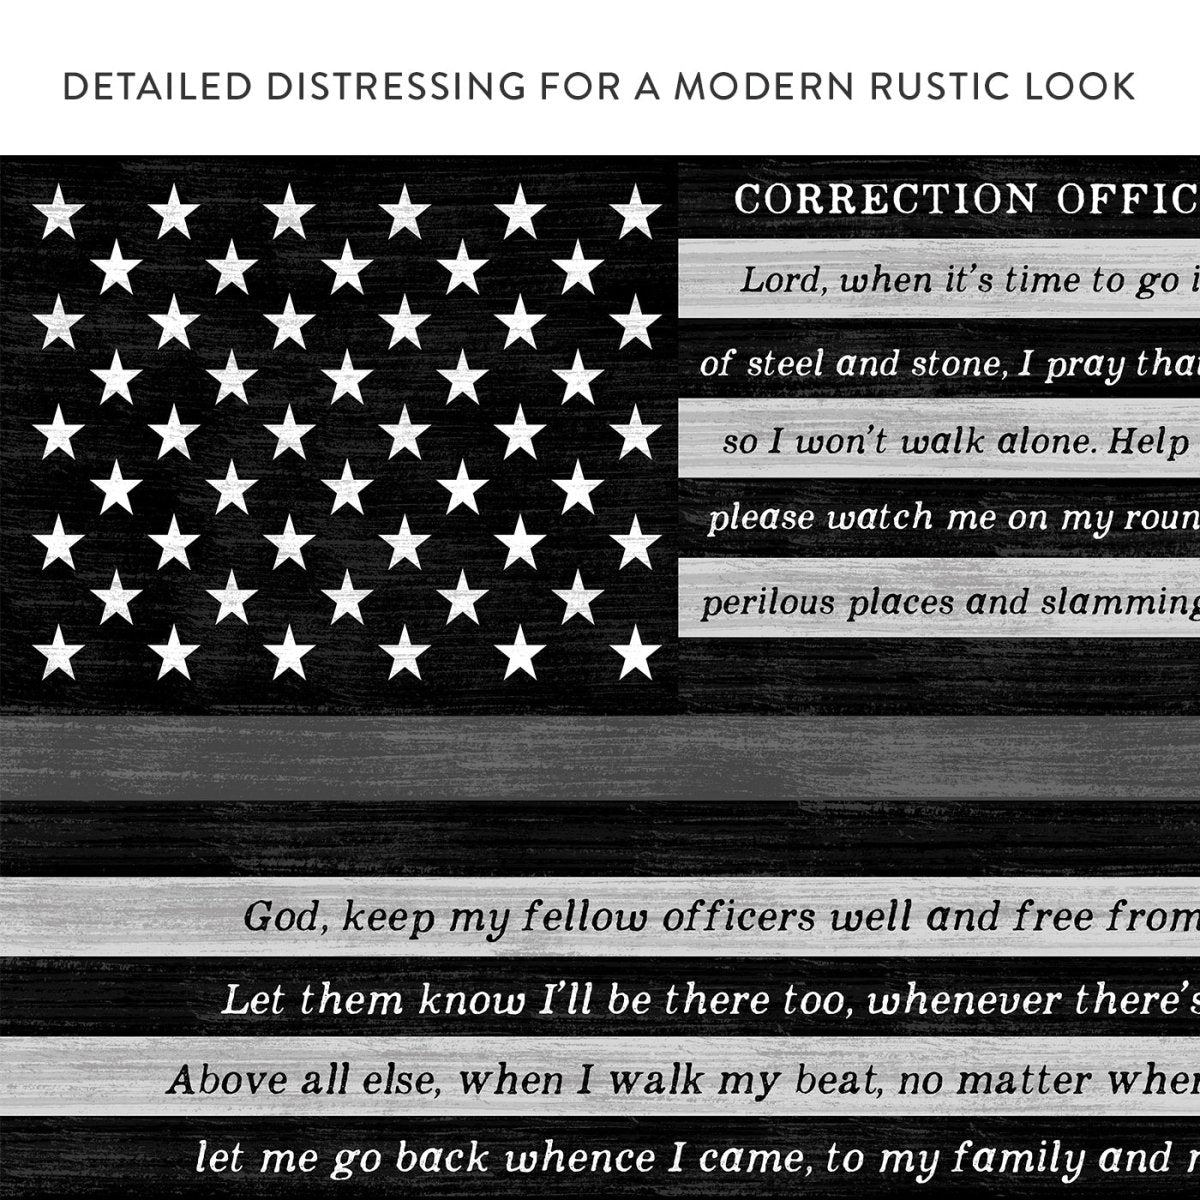 Correctional Officer Sign With Corrections Prayer With Modern Rustic Look - Pretty Perfect Studio